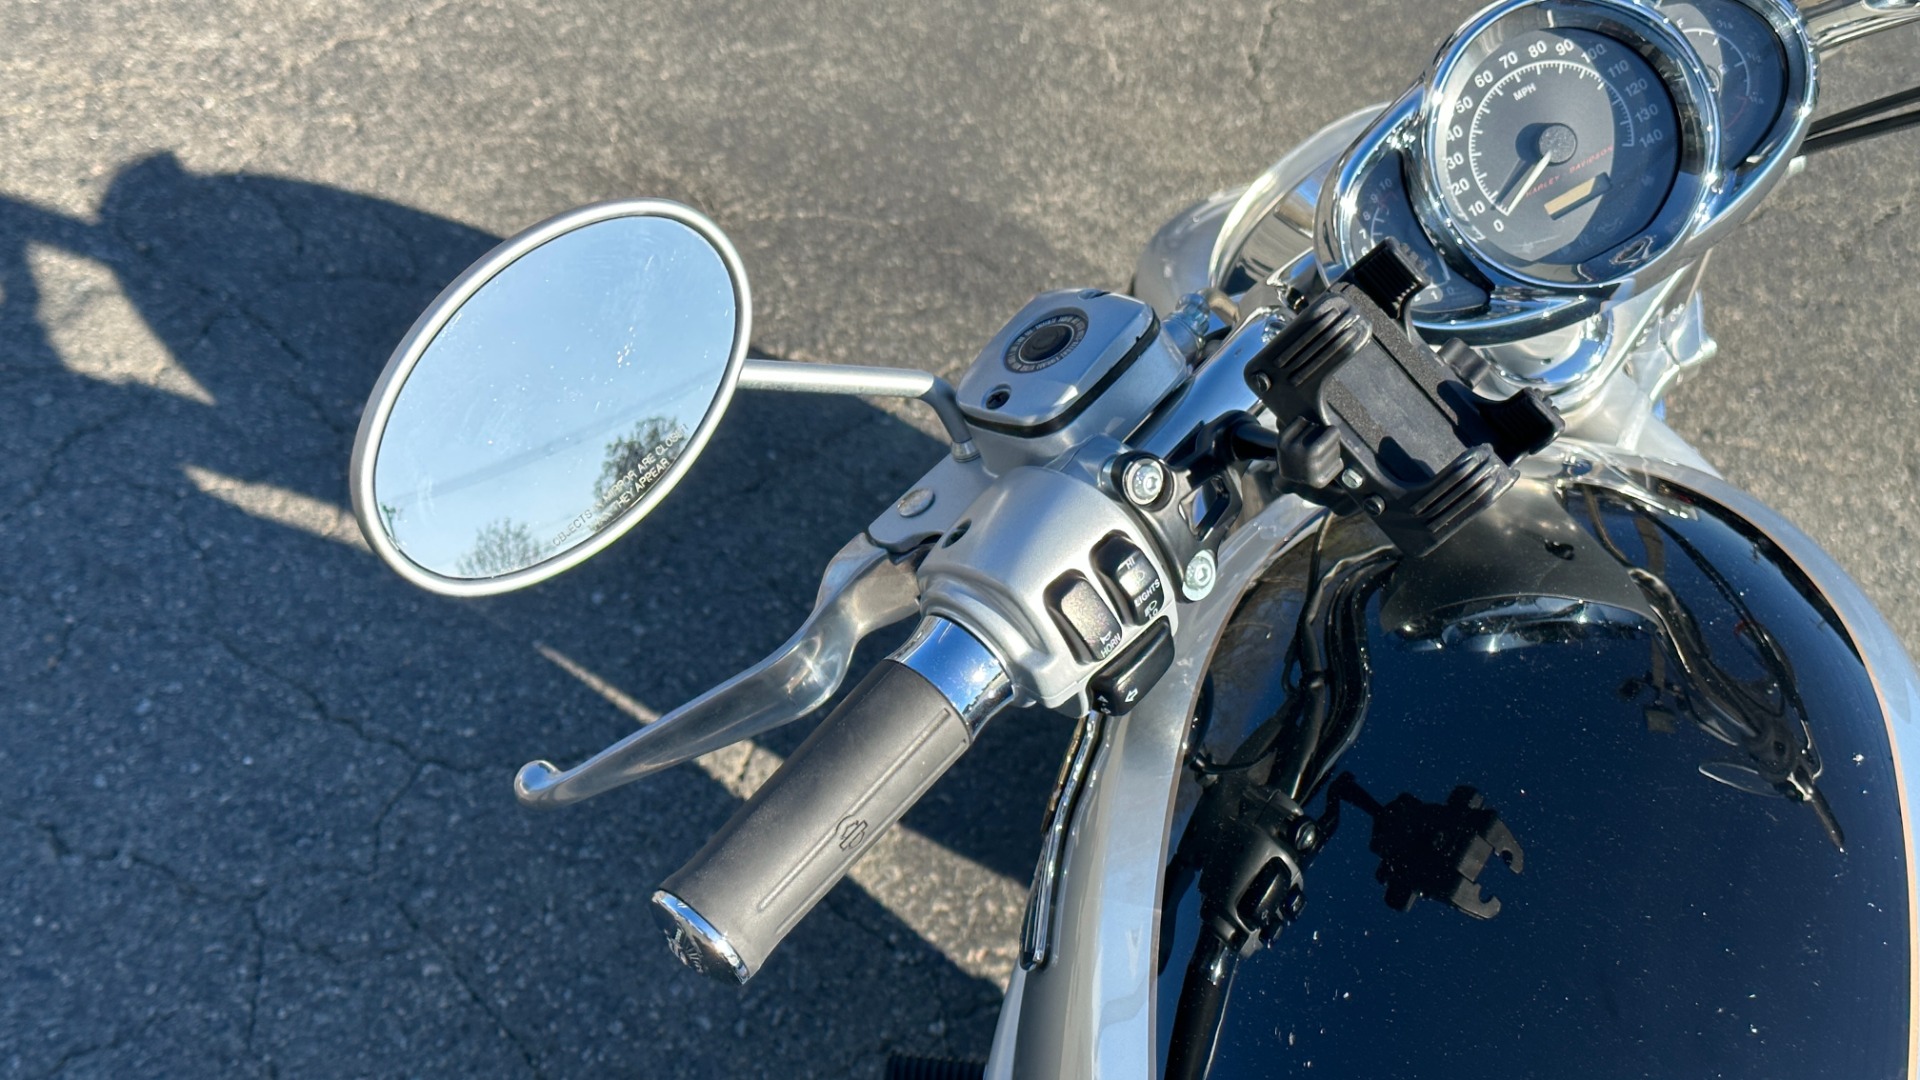 Used 2003 Harley Davidson V Rod ANNIVERSARY EDITION / 1130CC ENGINE / BREMBO BRAKES / VORTEX AIR SCOOPS for sale $9,995 at Formula Imports in Charlotte NC 28227 43